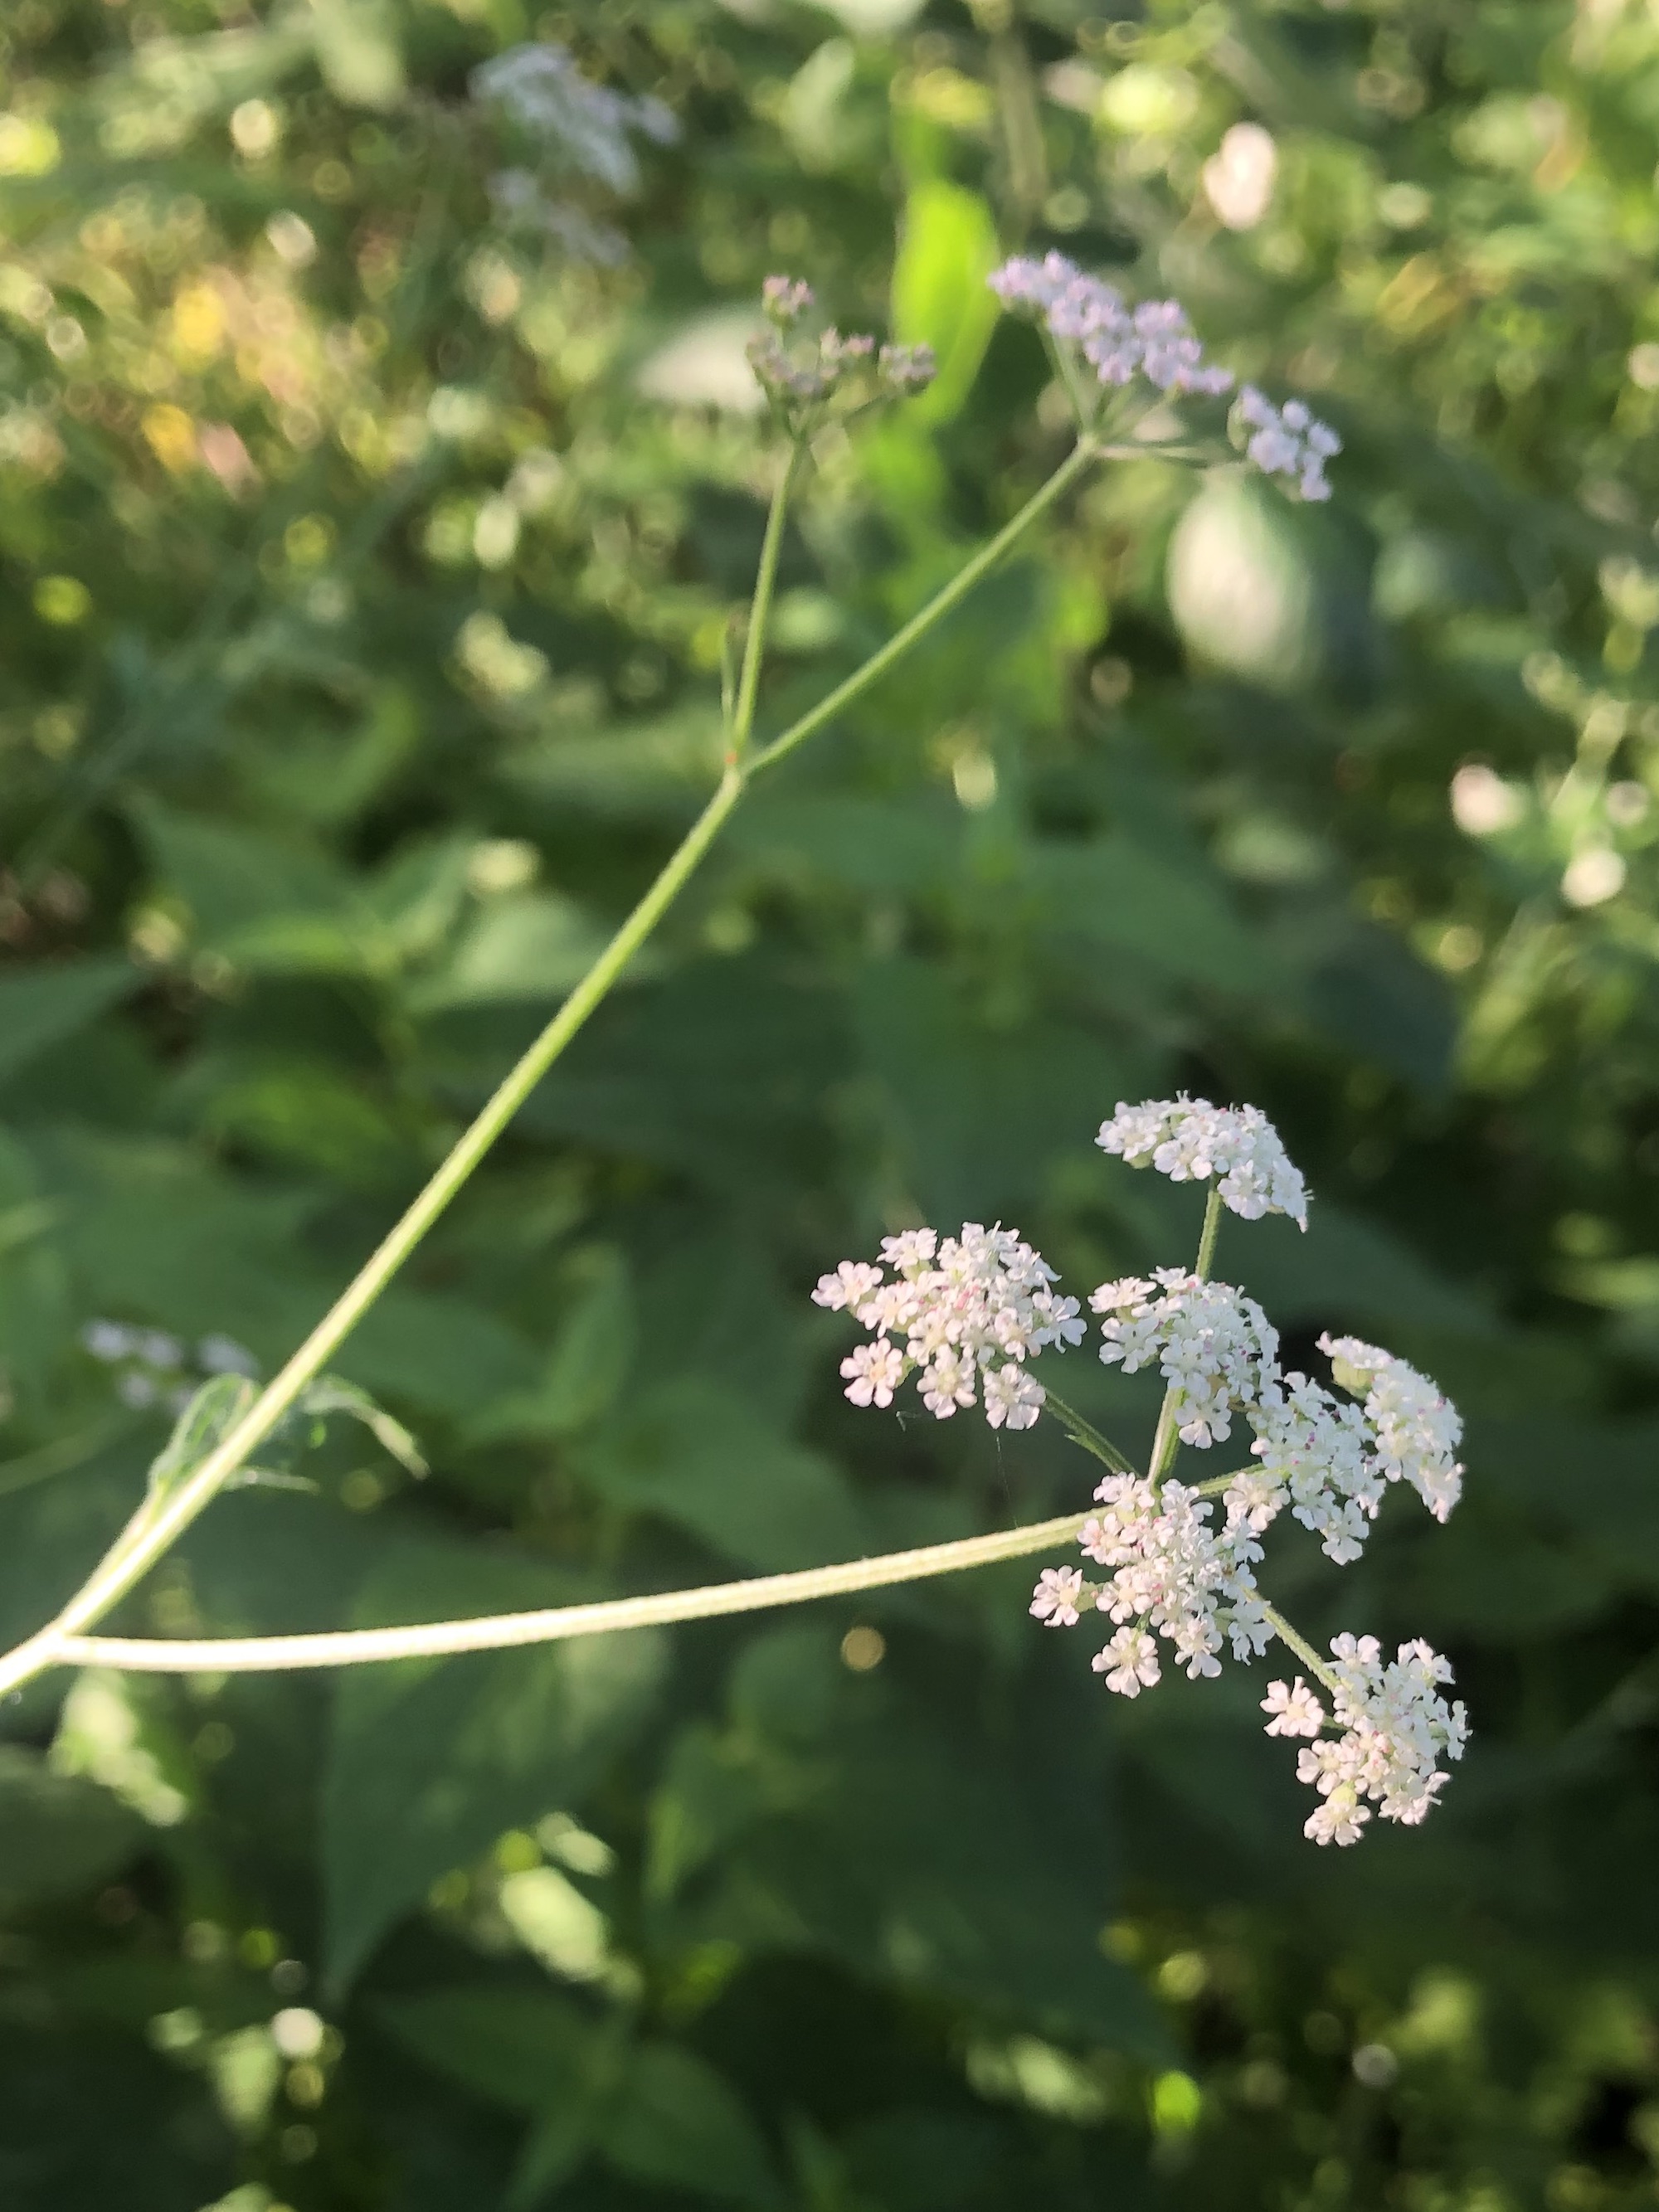 Hedge Parsley flower umbel in Madison, Wisconsin on July 20, 2022.